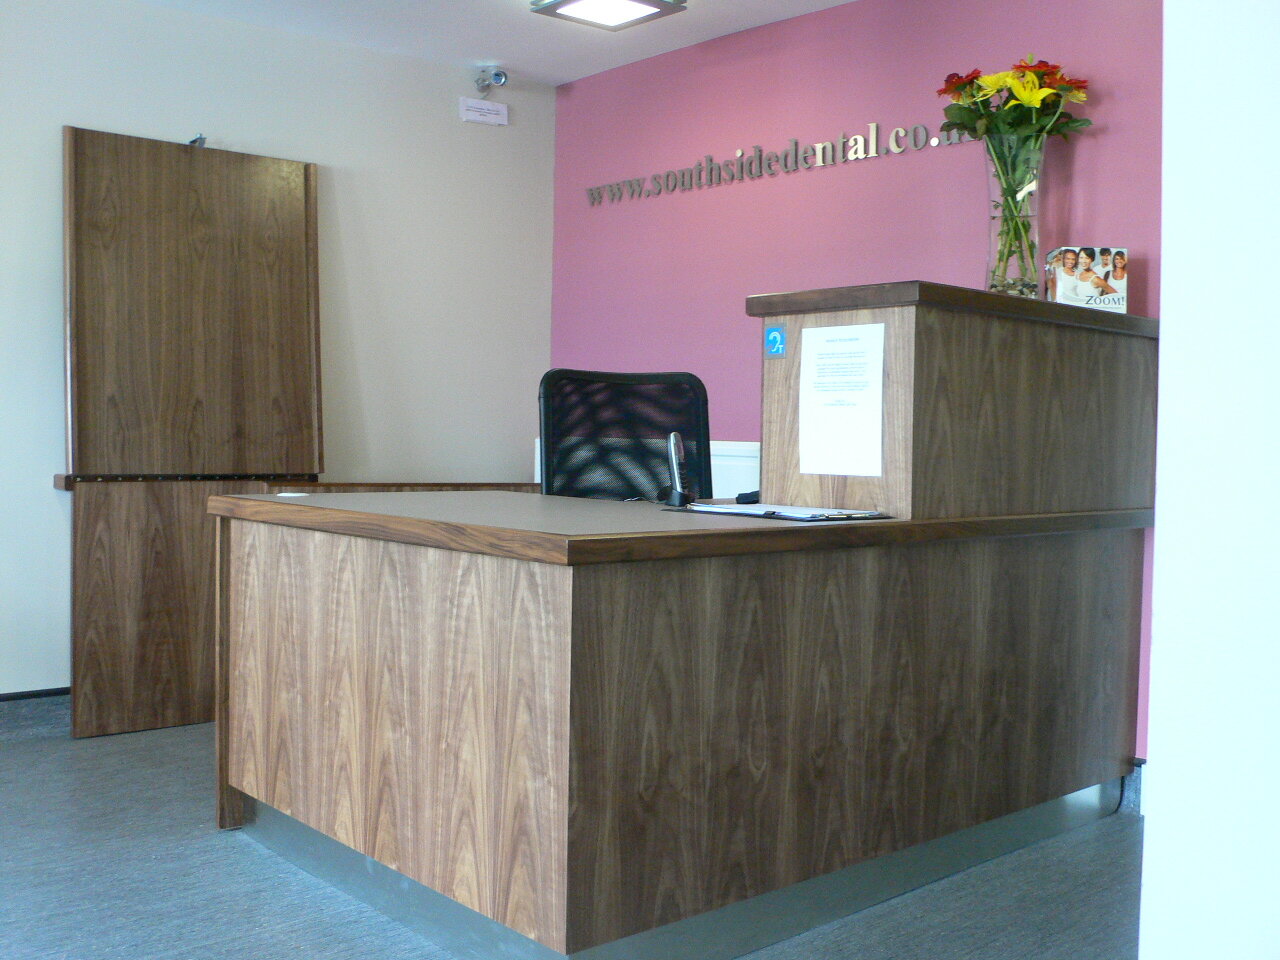  The entrance, reception and waiting areas of the former doctors’ surgery were reconfigured to provide full wheelchair access. 